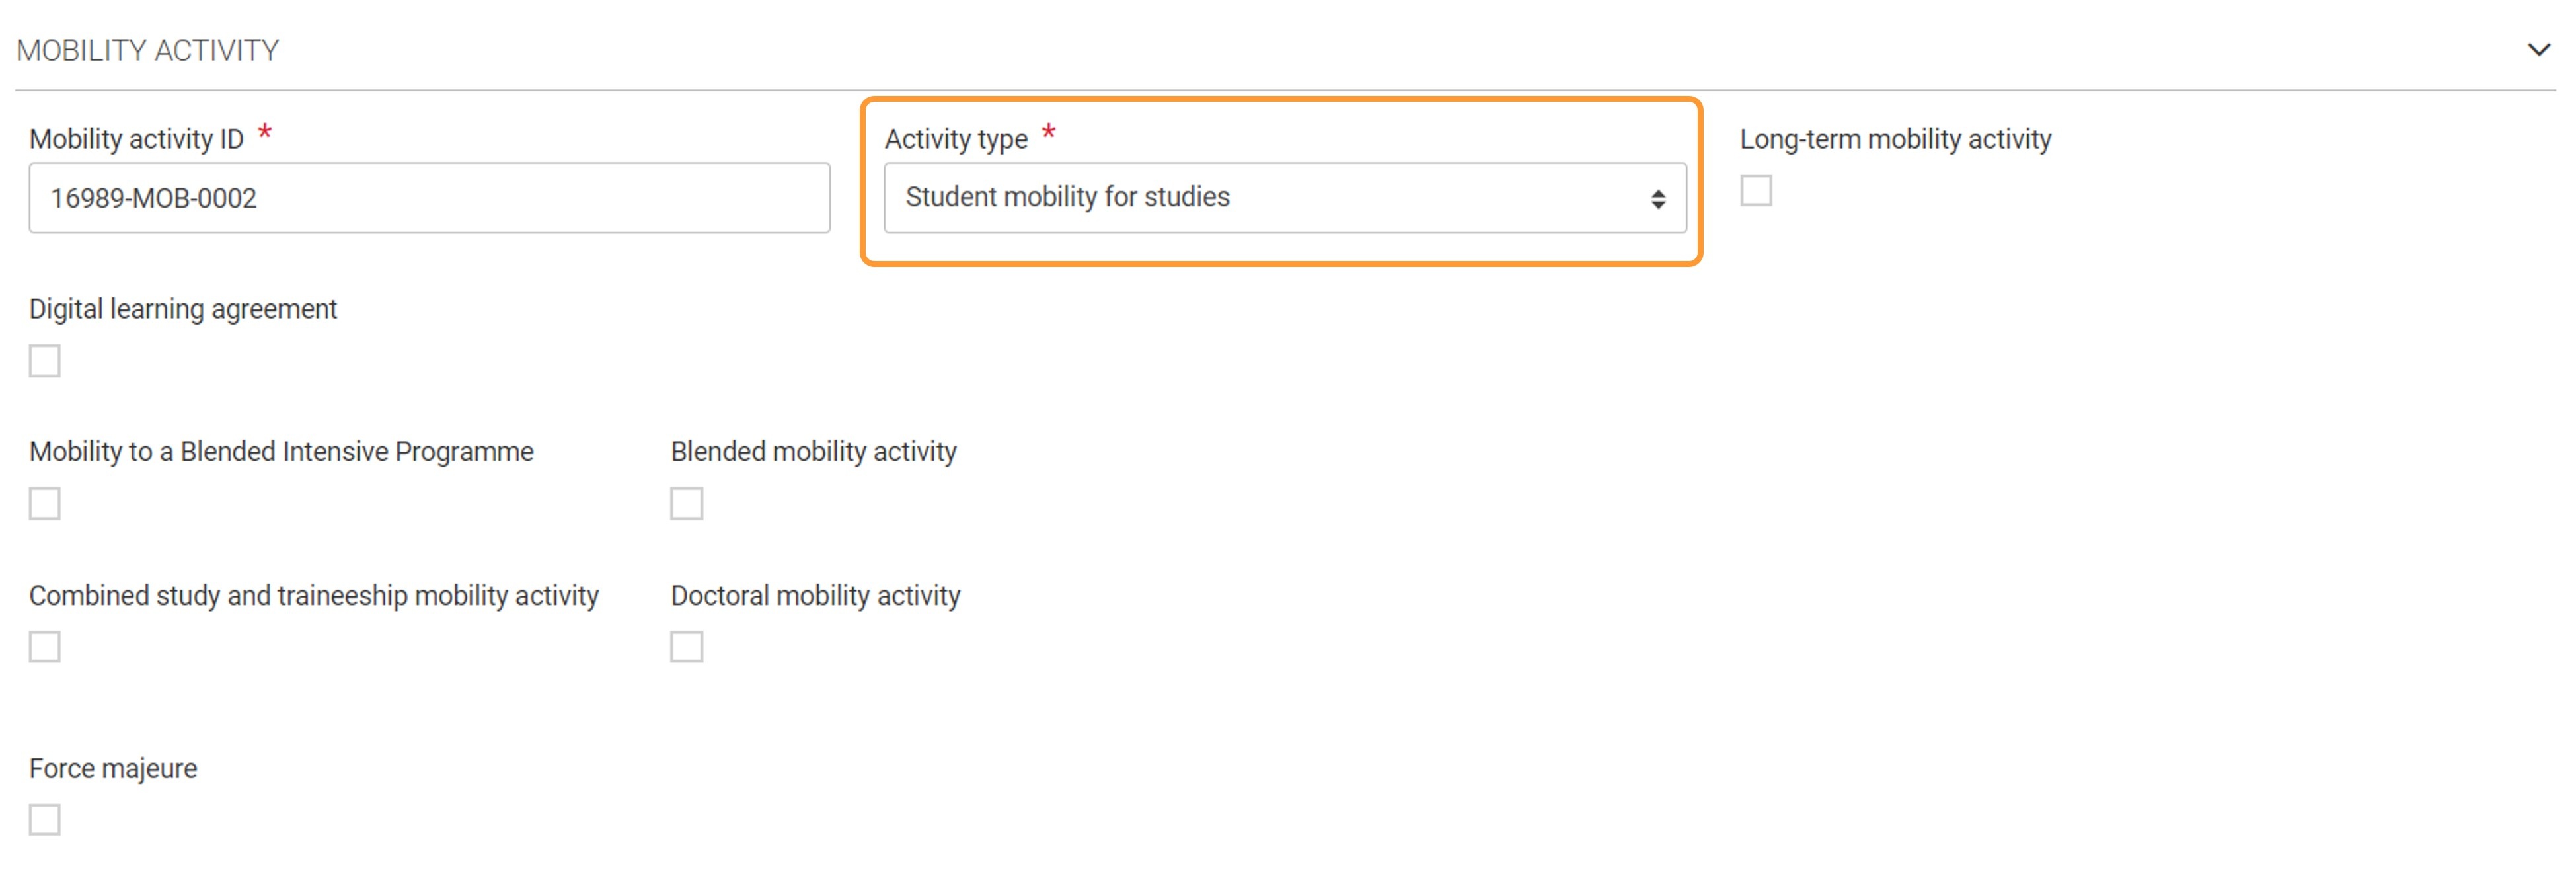 Mobility Activity section including the flags available for a Student mobility for studies in a call 2022 project